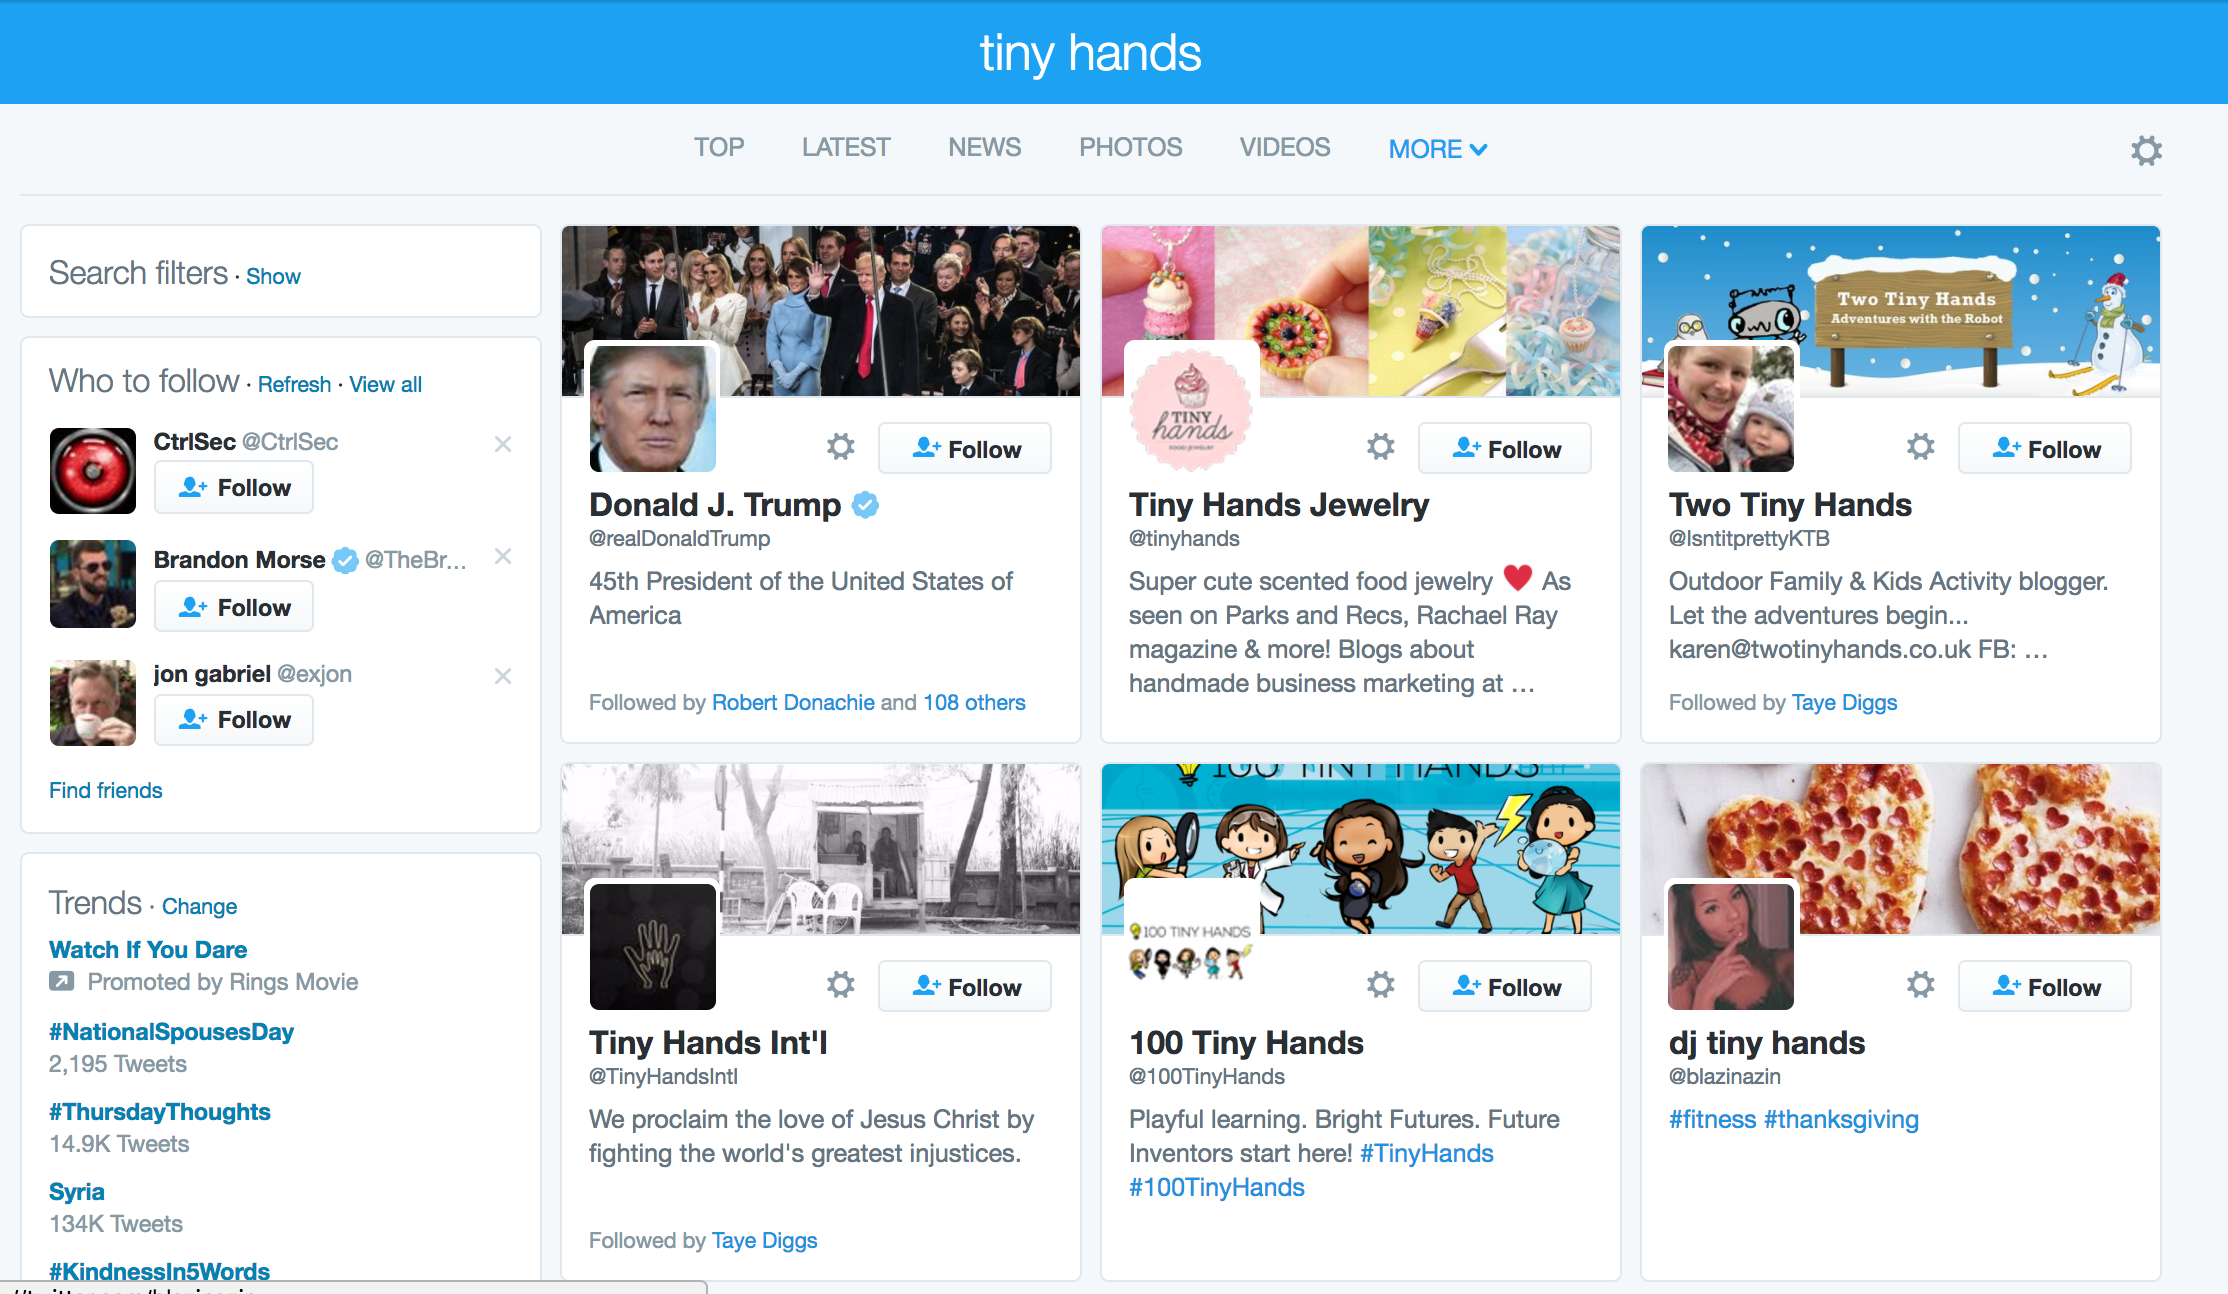 [Twitter/Screenshot] - Search for "tiny hands" suggests Donald Trump's official account.